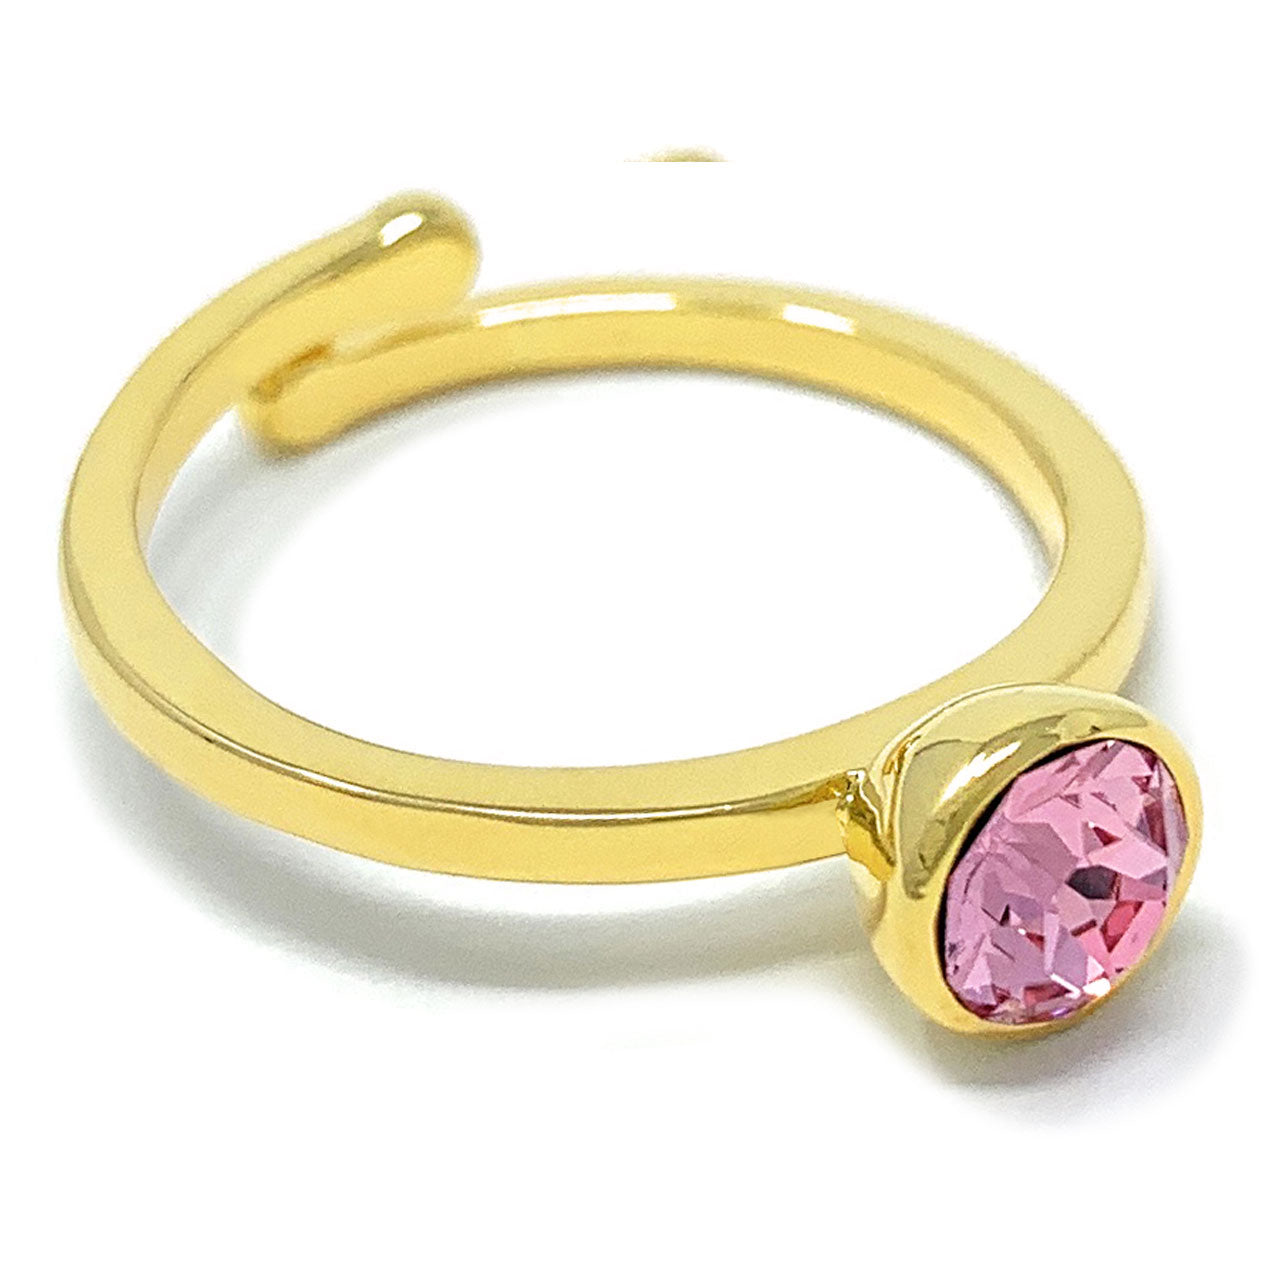 Harley Adjustable Ring with Pink Light Rose Round Crystals from Swarovski Gold Plated - Ed Heart